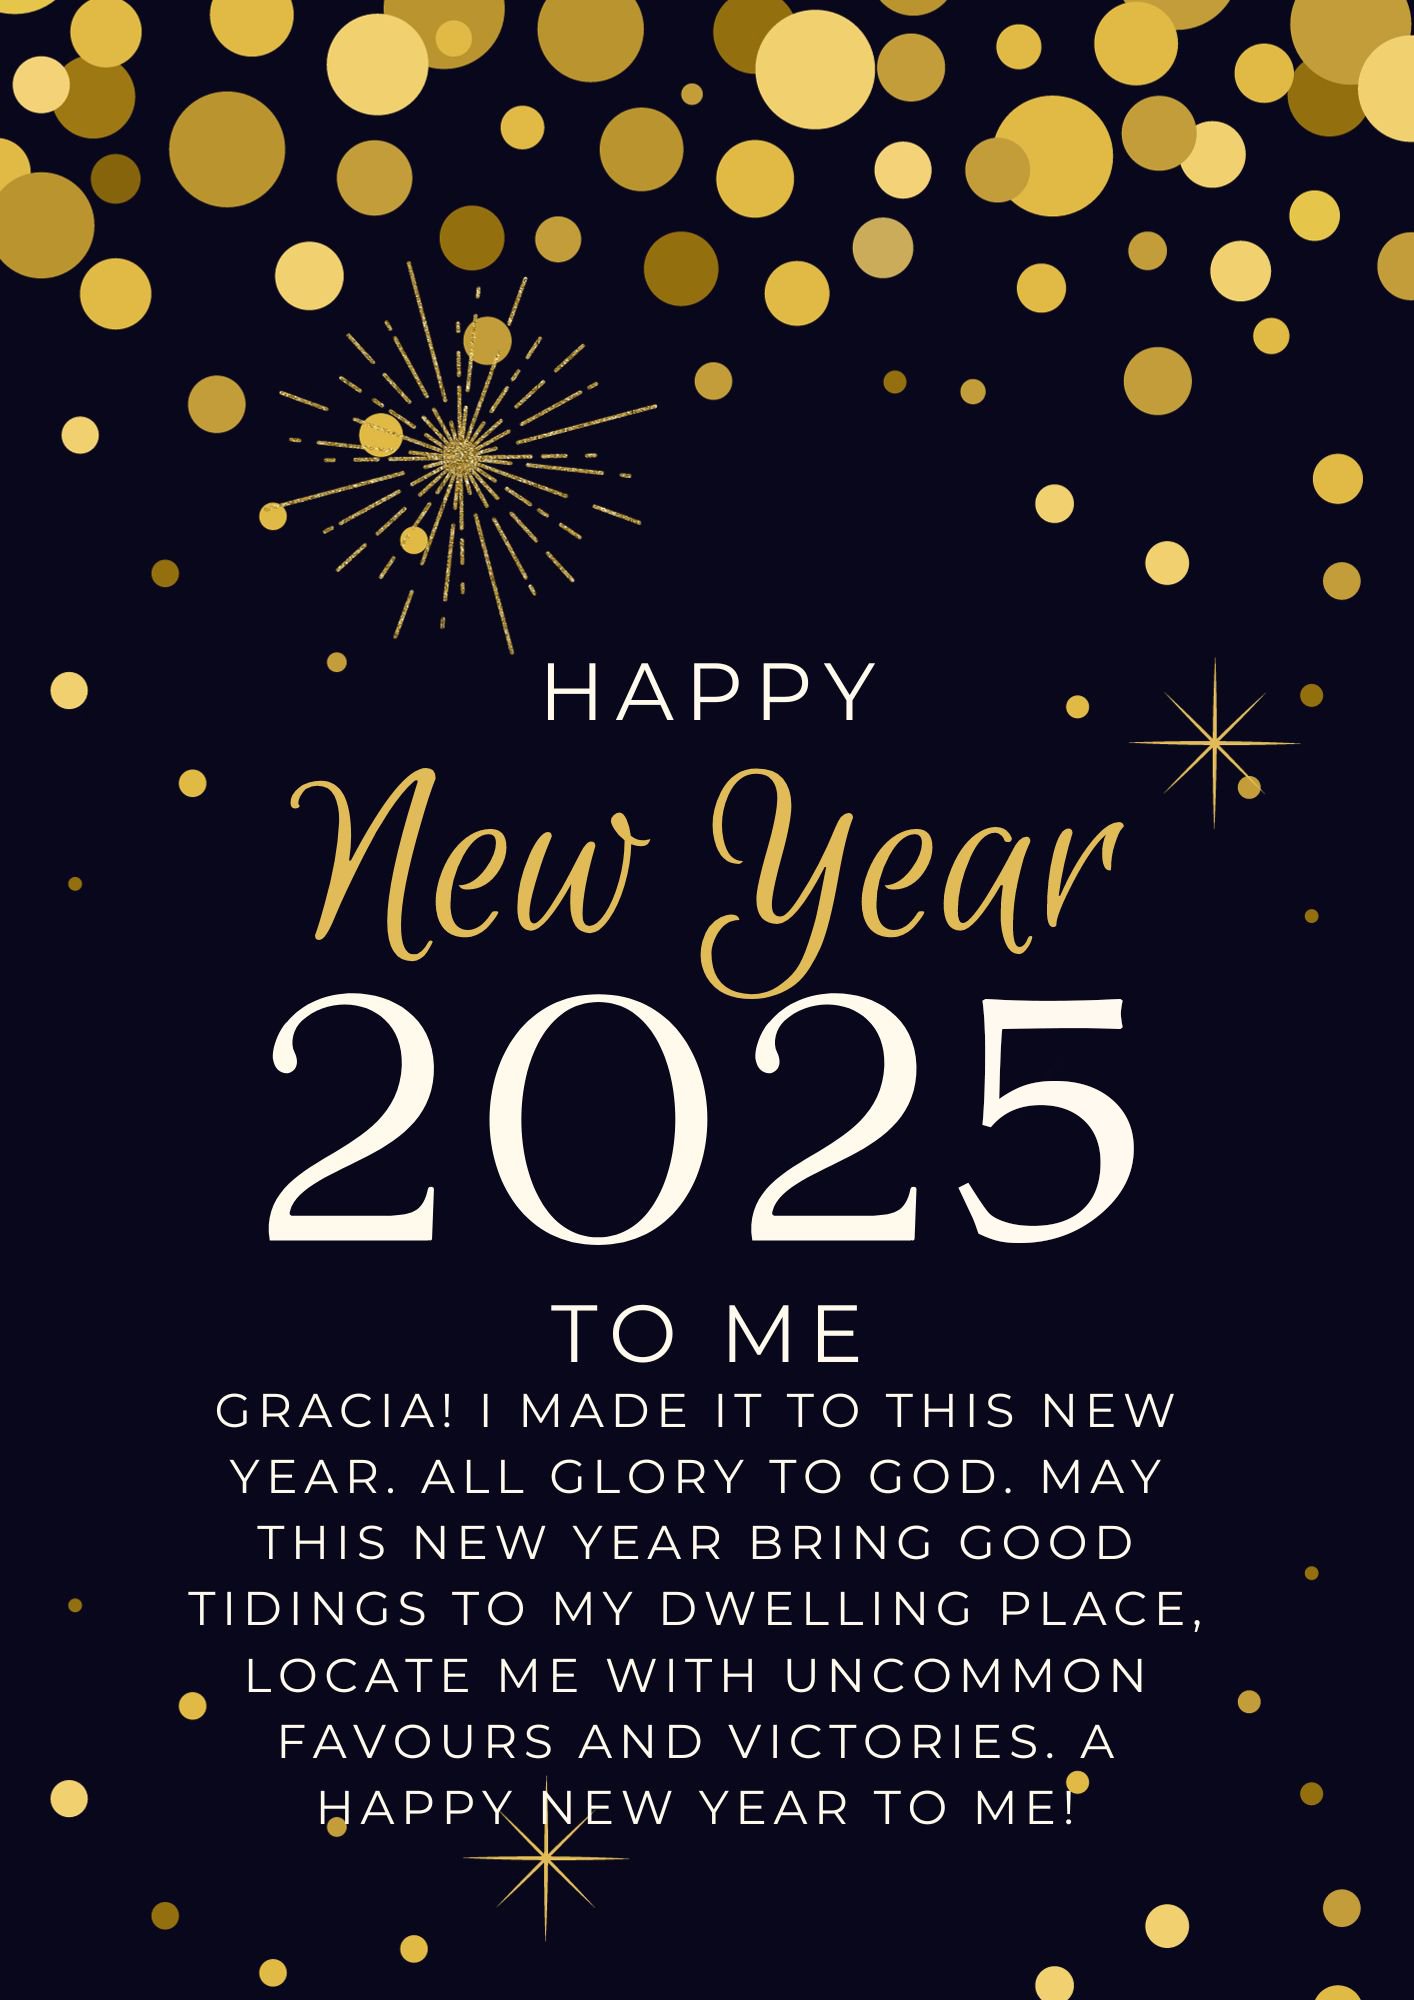 Blue & Gold New Year Wishes For MySelf 2025